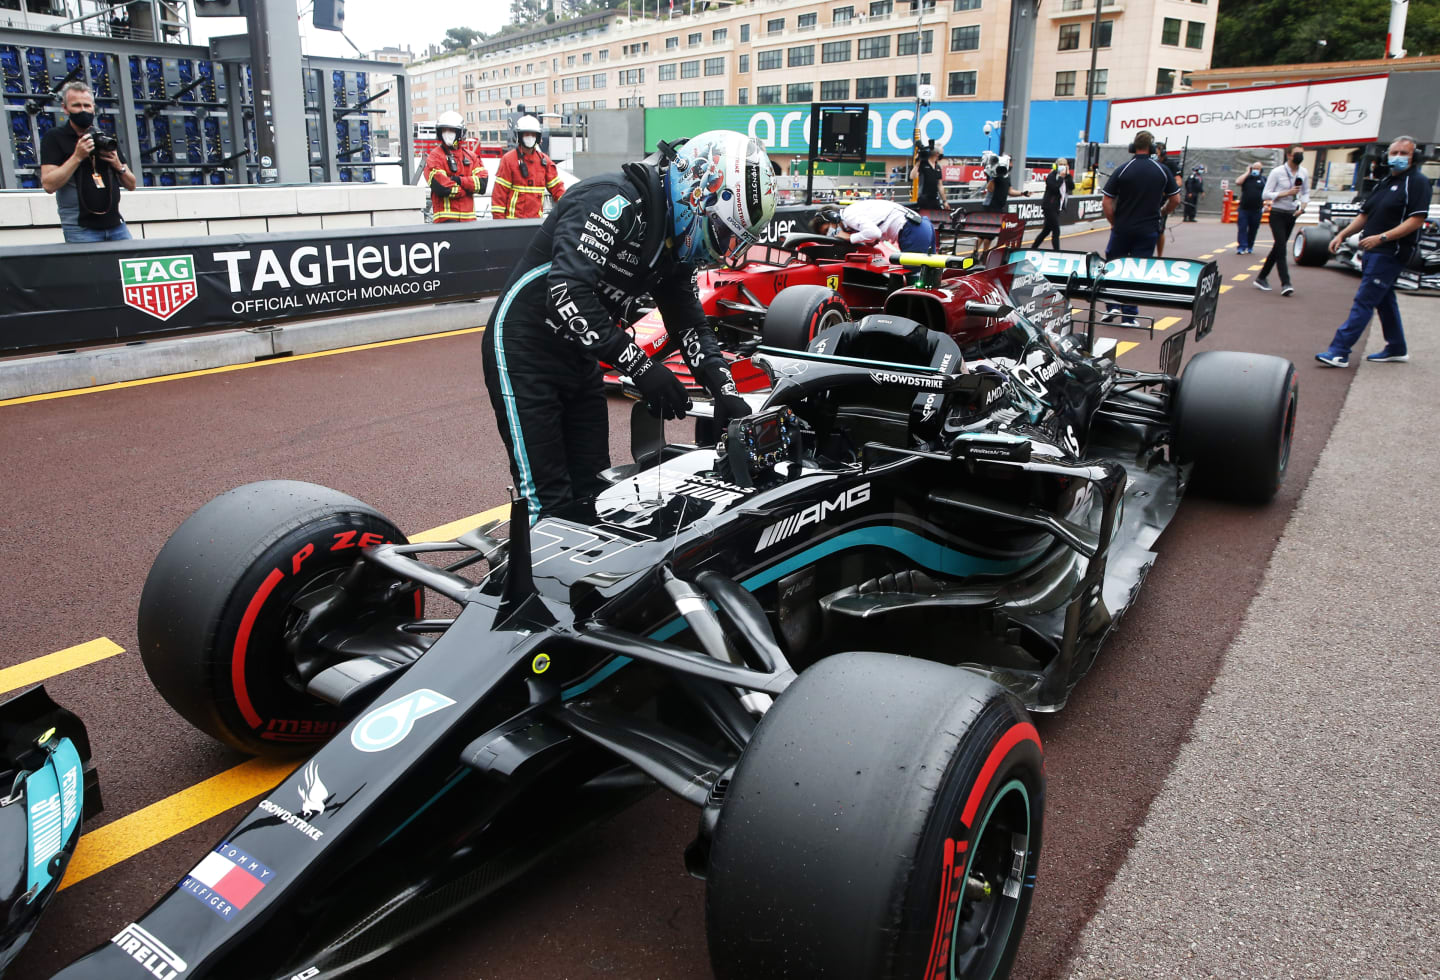 MONTE-CARLO, MONACO - MAY 22: Third placed qualifier Valtteri Bottas of Finland and Mercedes GP climbs out of his car in parc ferme after qualifying prior to the F1 Grand Prix of Monaco at Circuit de Monaco on May 22, 2021 in Monte-Carlo, Monaco. (Photo by Sebastien Nogier - Pool/Getty Images)